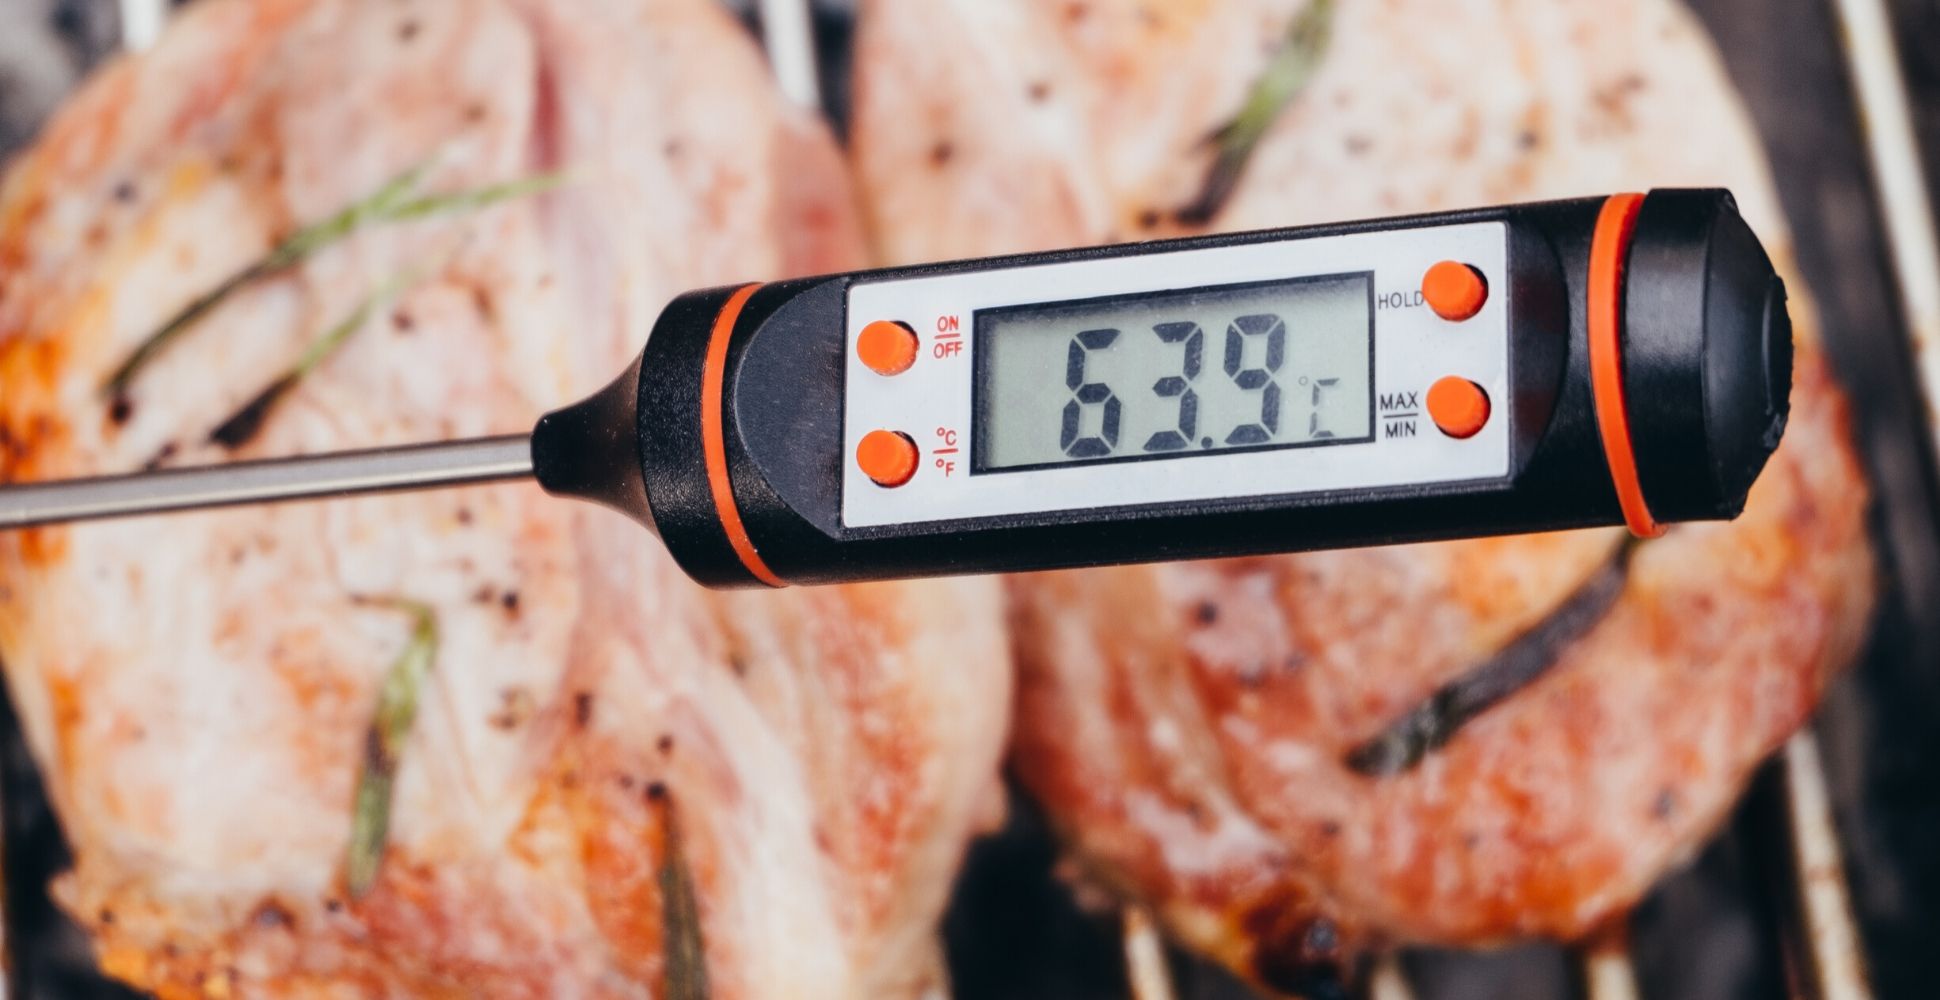 5 Best Meat Thermometers UK (2021 Review) | Spruce Up!